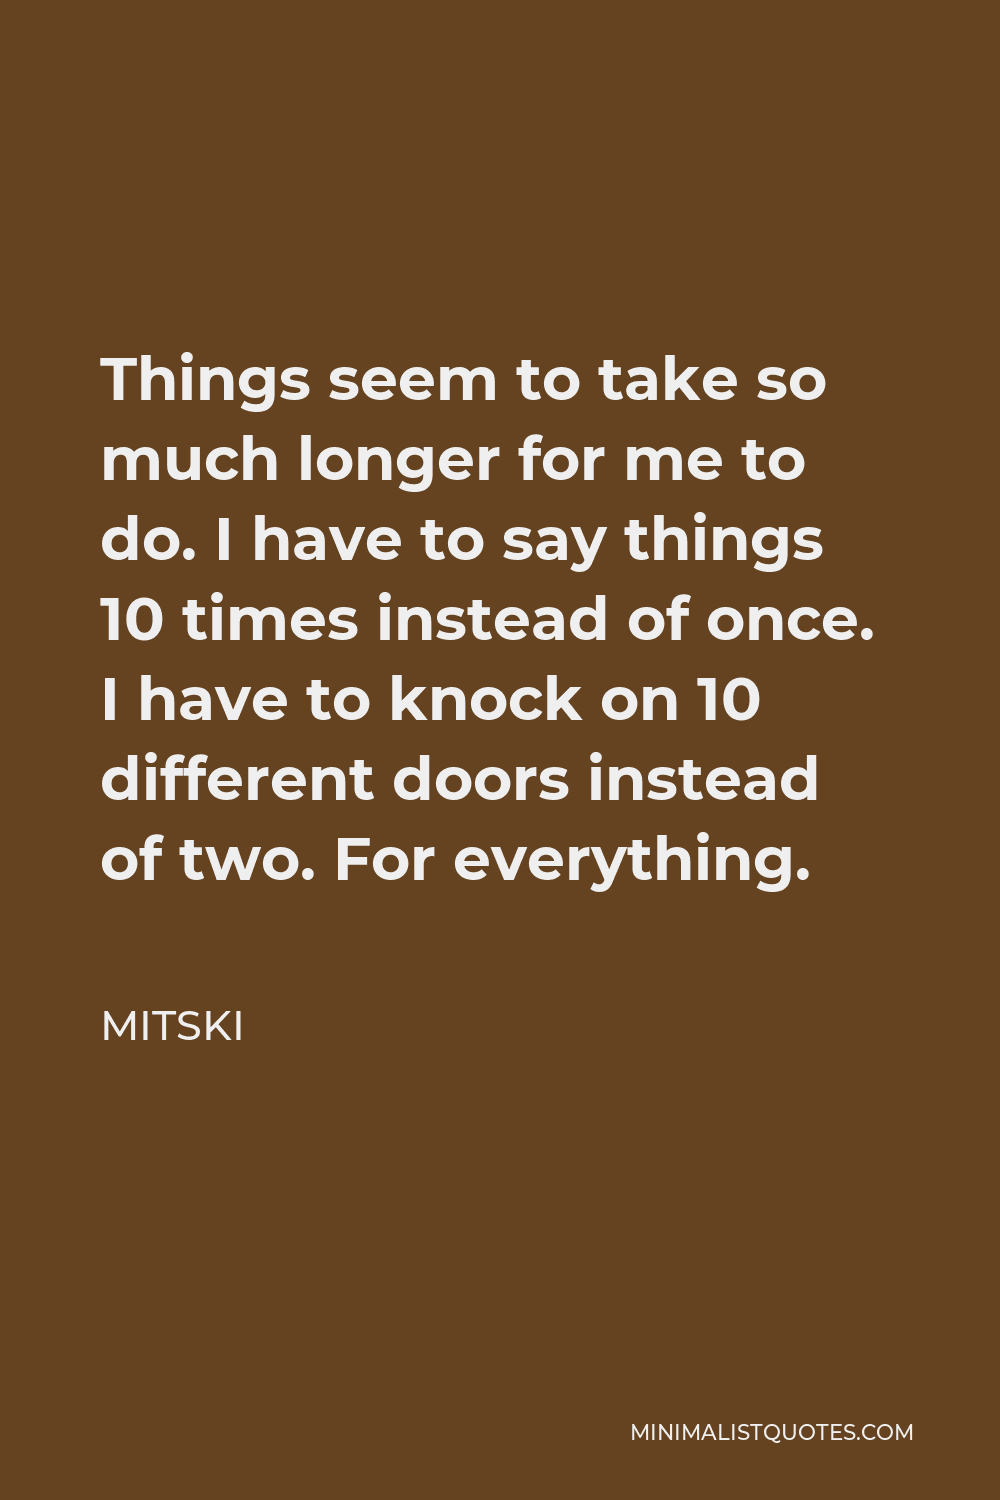 Mitski Quote - Things seem to take so much longer for me to do. I have to say things 10 times instead of once. I have to knock on 10 different doors instead of two. For everything.